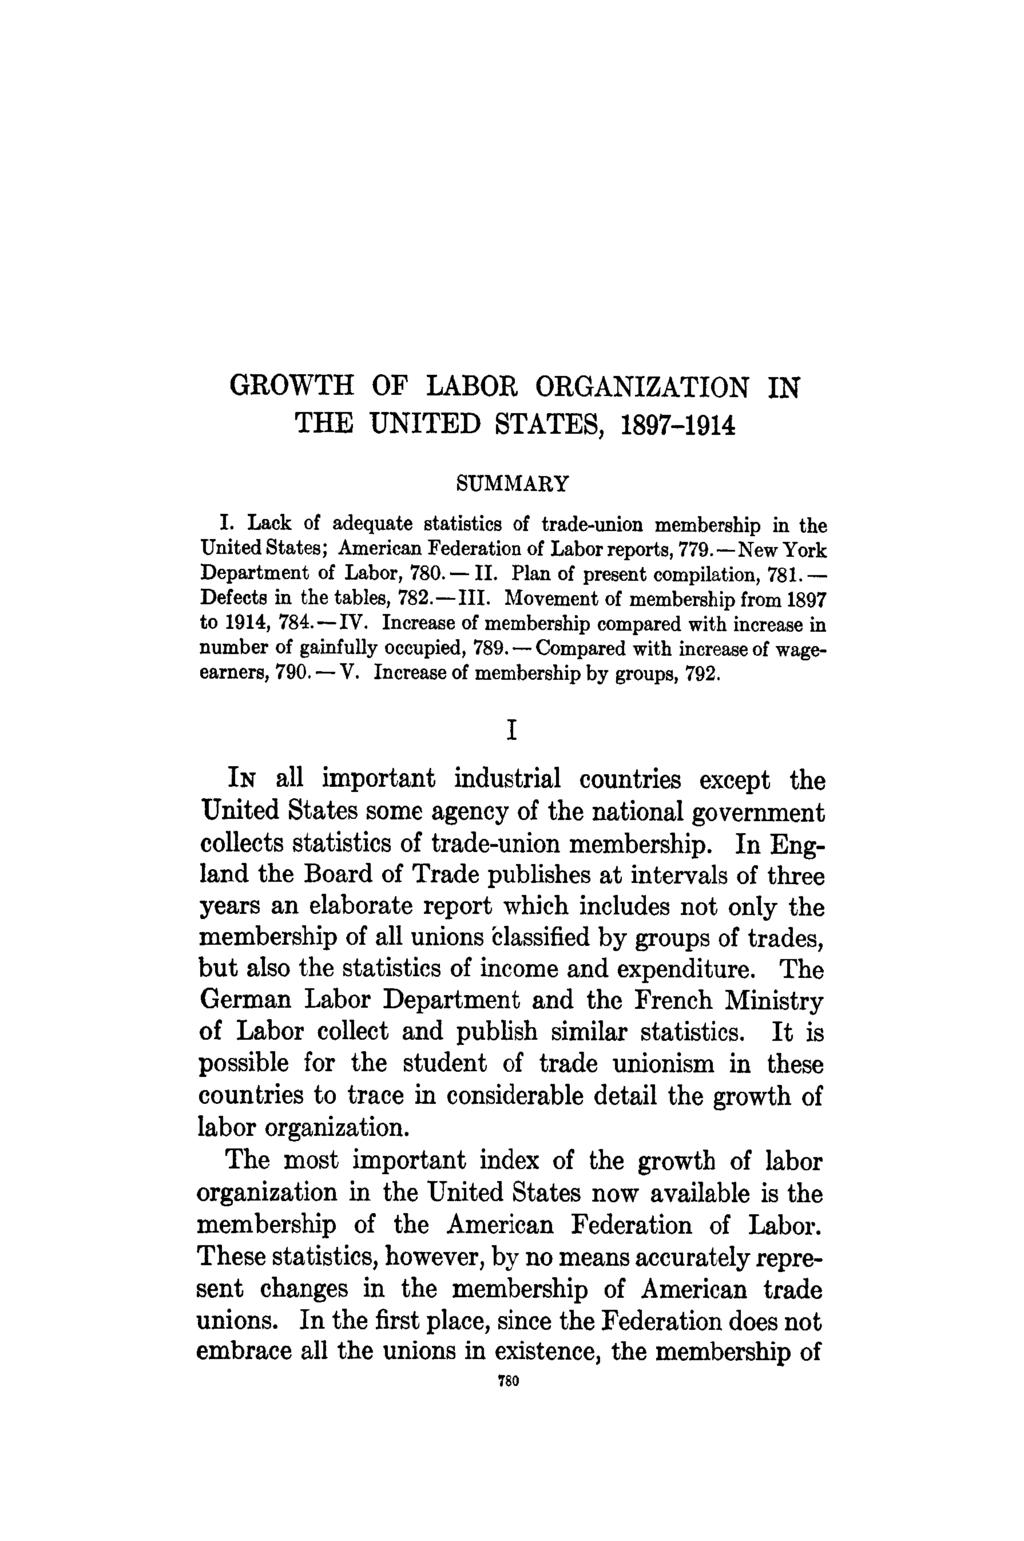 GROWTH OF LABOR ORGANIZATION IN THE UNITED STATES, 1897-1914 SUMMARY I. Lack of adequate statistics of trade-union membership in the United States; American Federation of Labor reports, 779.